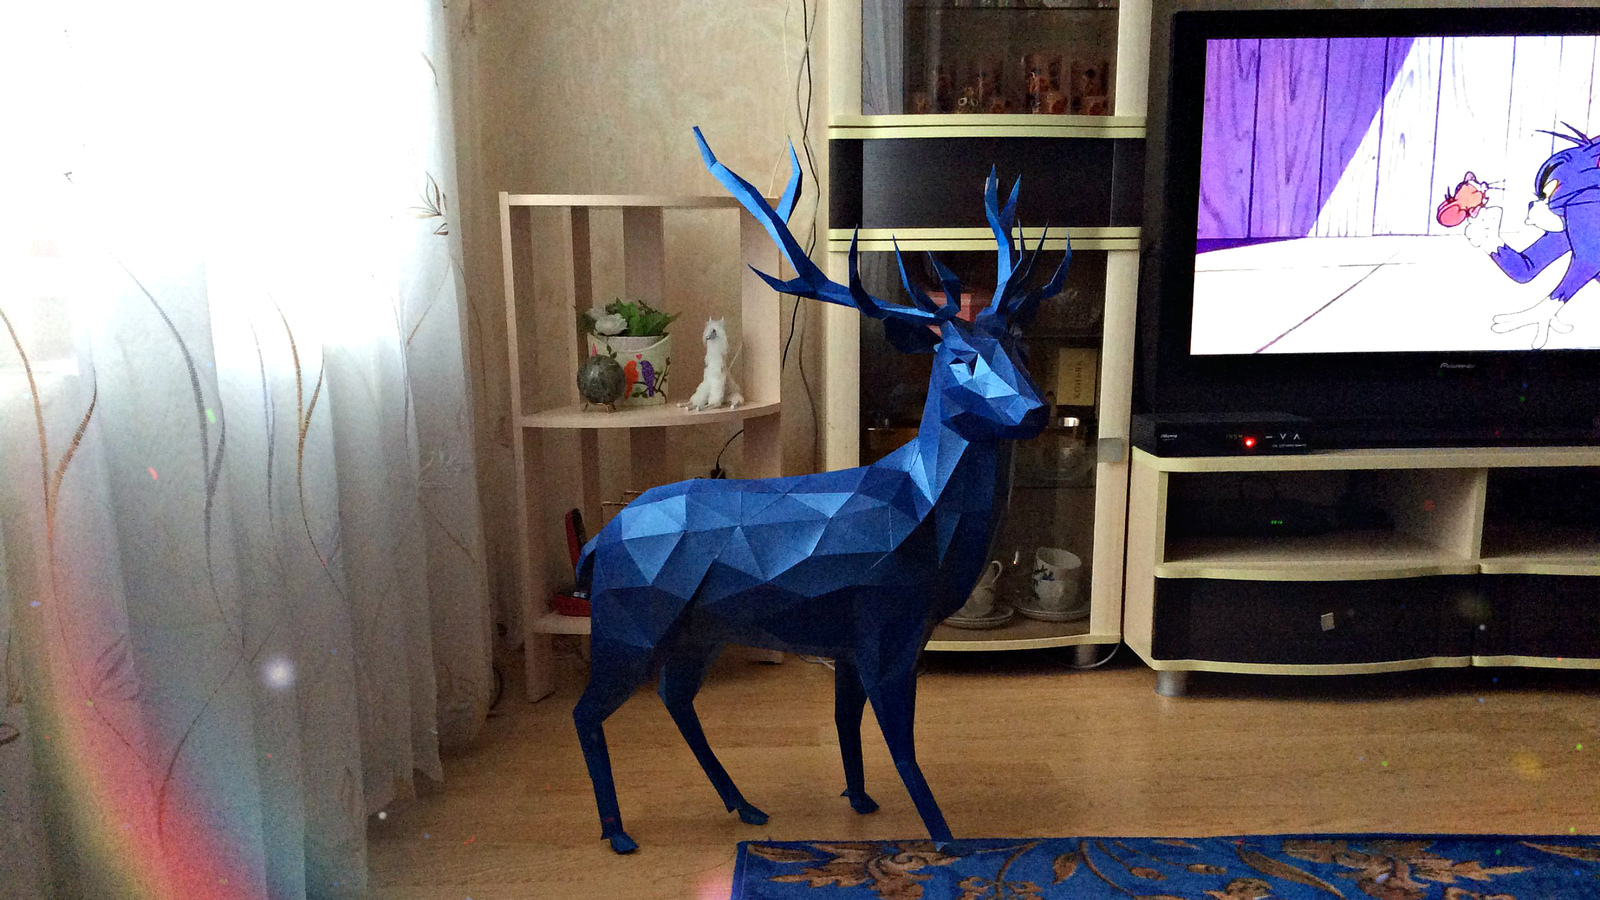 A piece of the process and the result :3 - My, Deer, New Year, Decoration, Interior, Handmade, With your own hands, Pepakura, Longpost, Deer, Papercraft